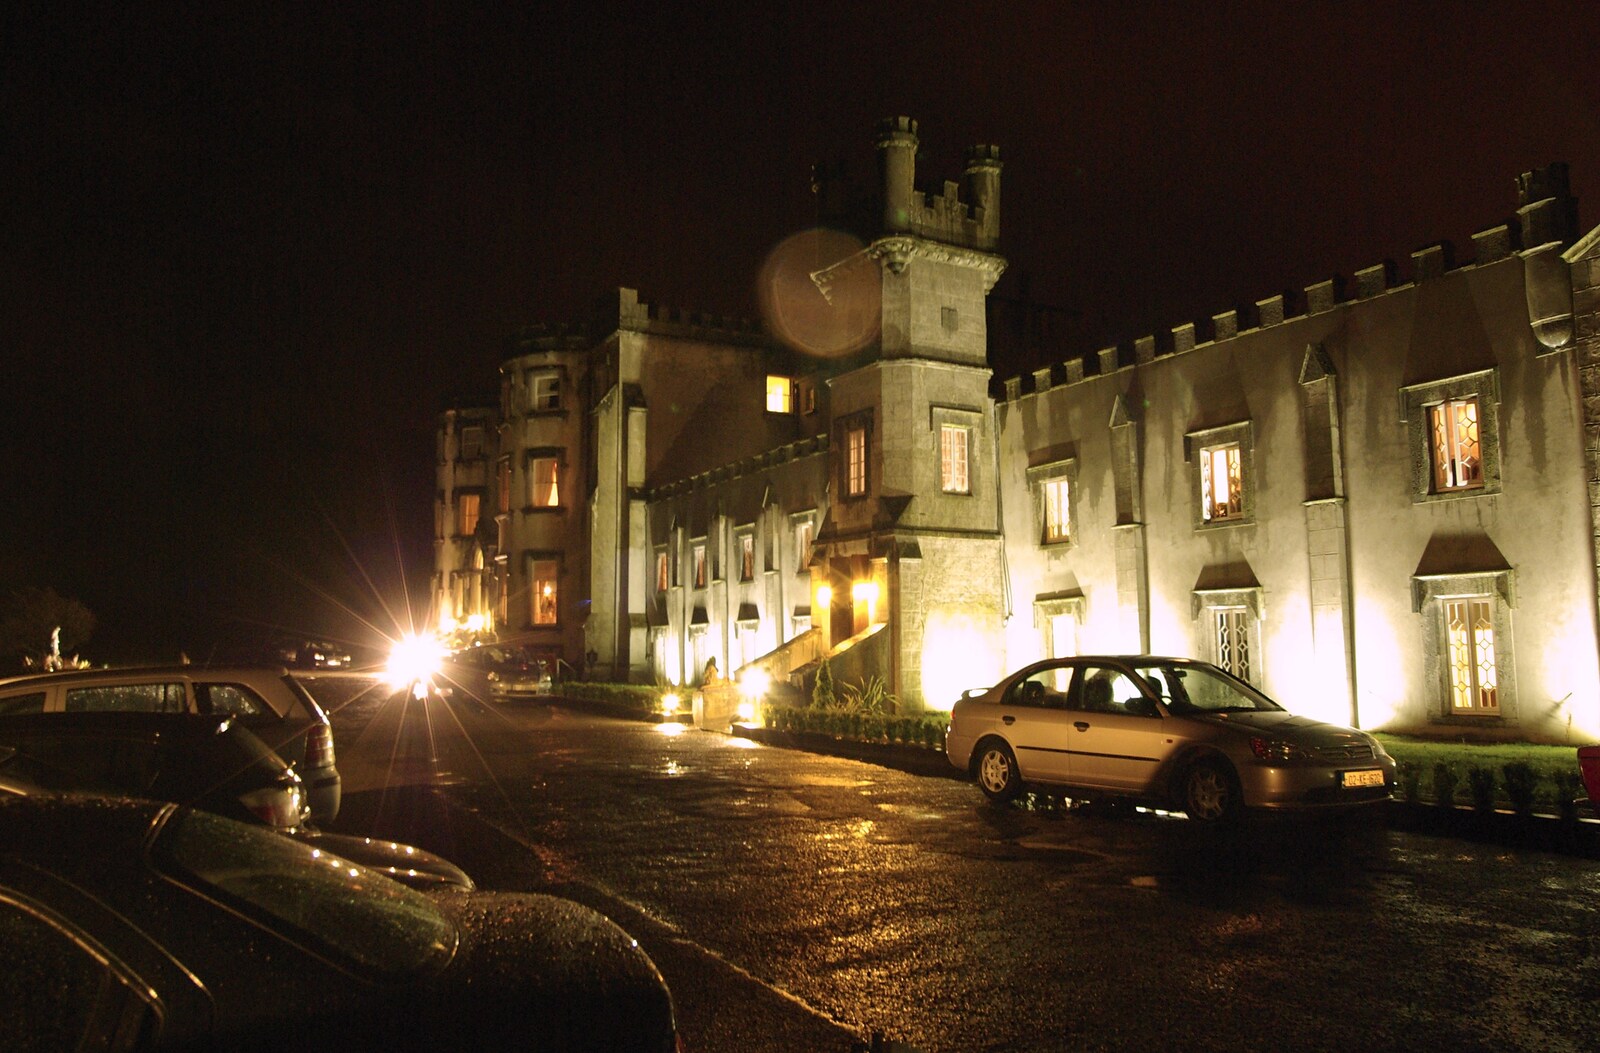 Paul and Jenny's Wedding, Tralee, County Kerry, Ireland - 3rd May 2008: Ballyseede Castle at night